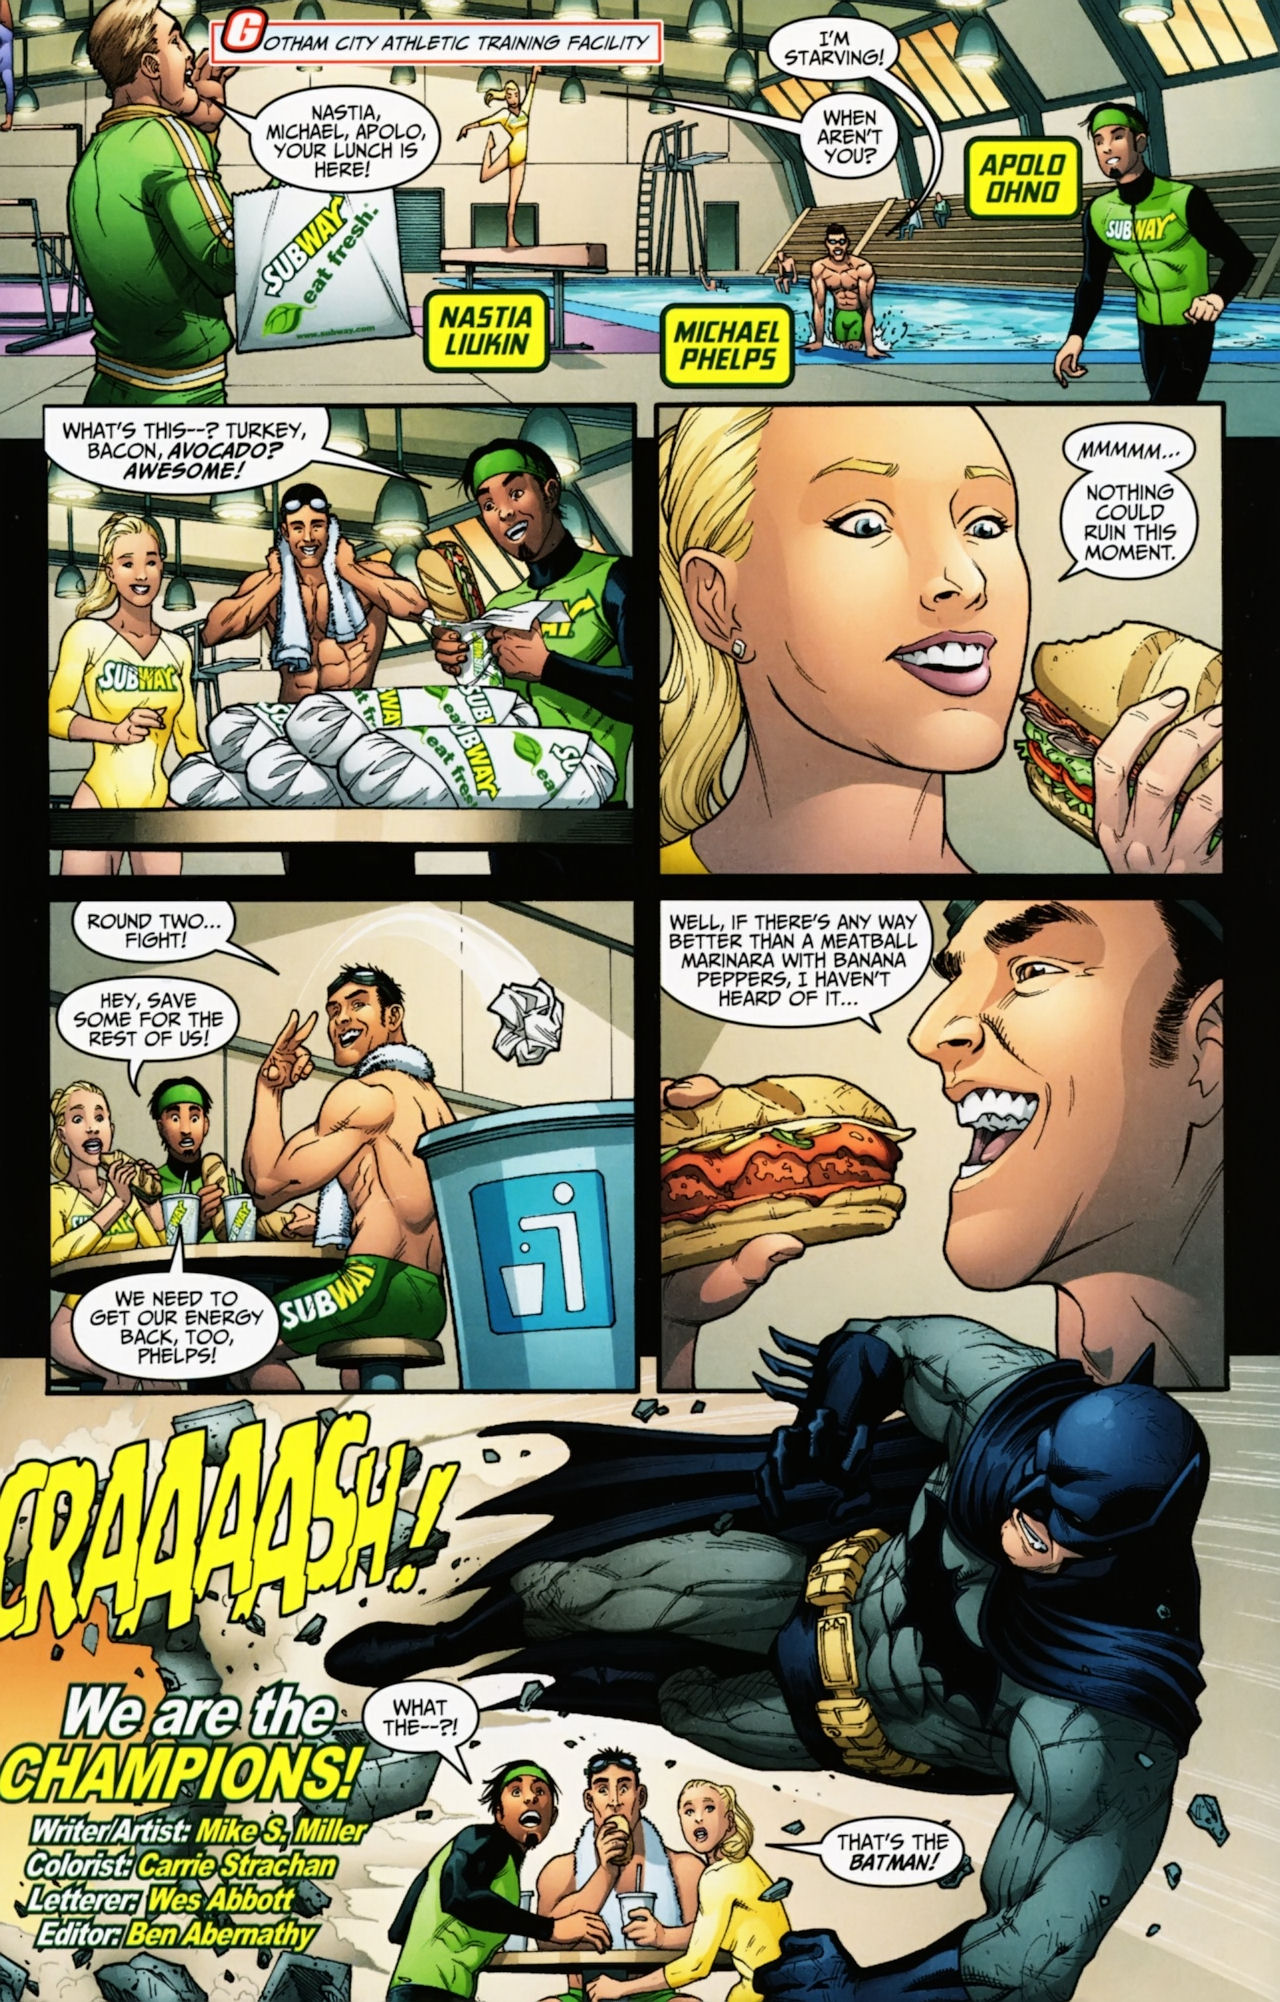 Read online Subway Presents: Justice League comic -  Issue #3 - 2